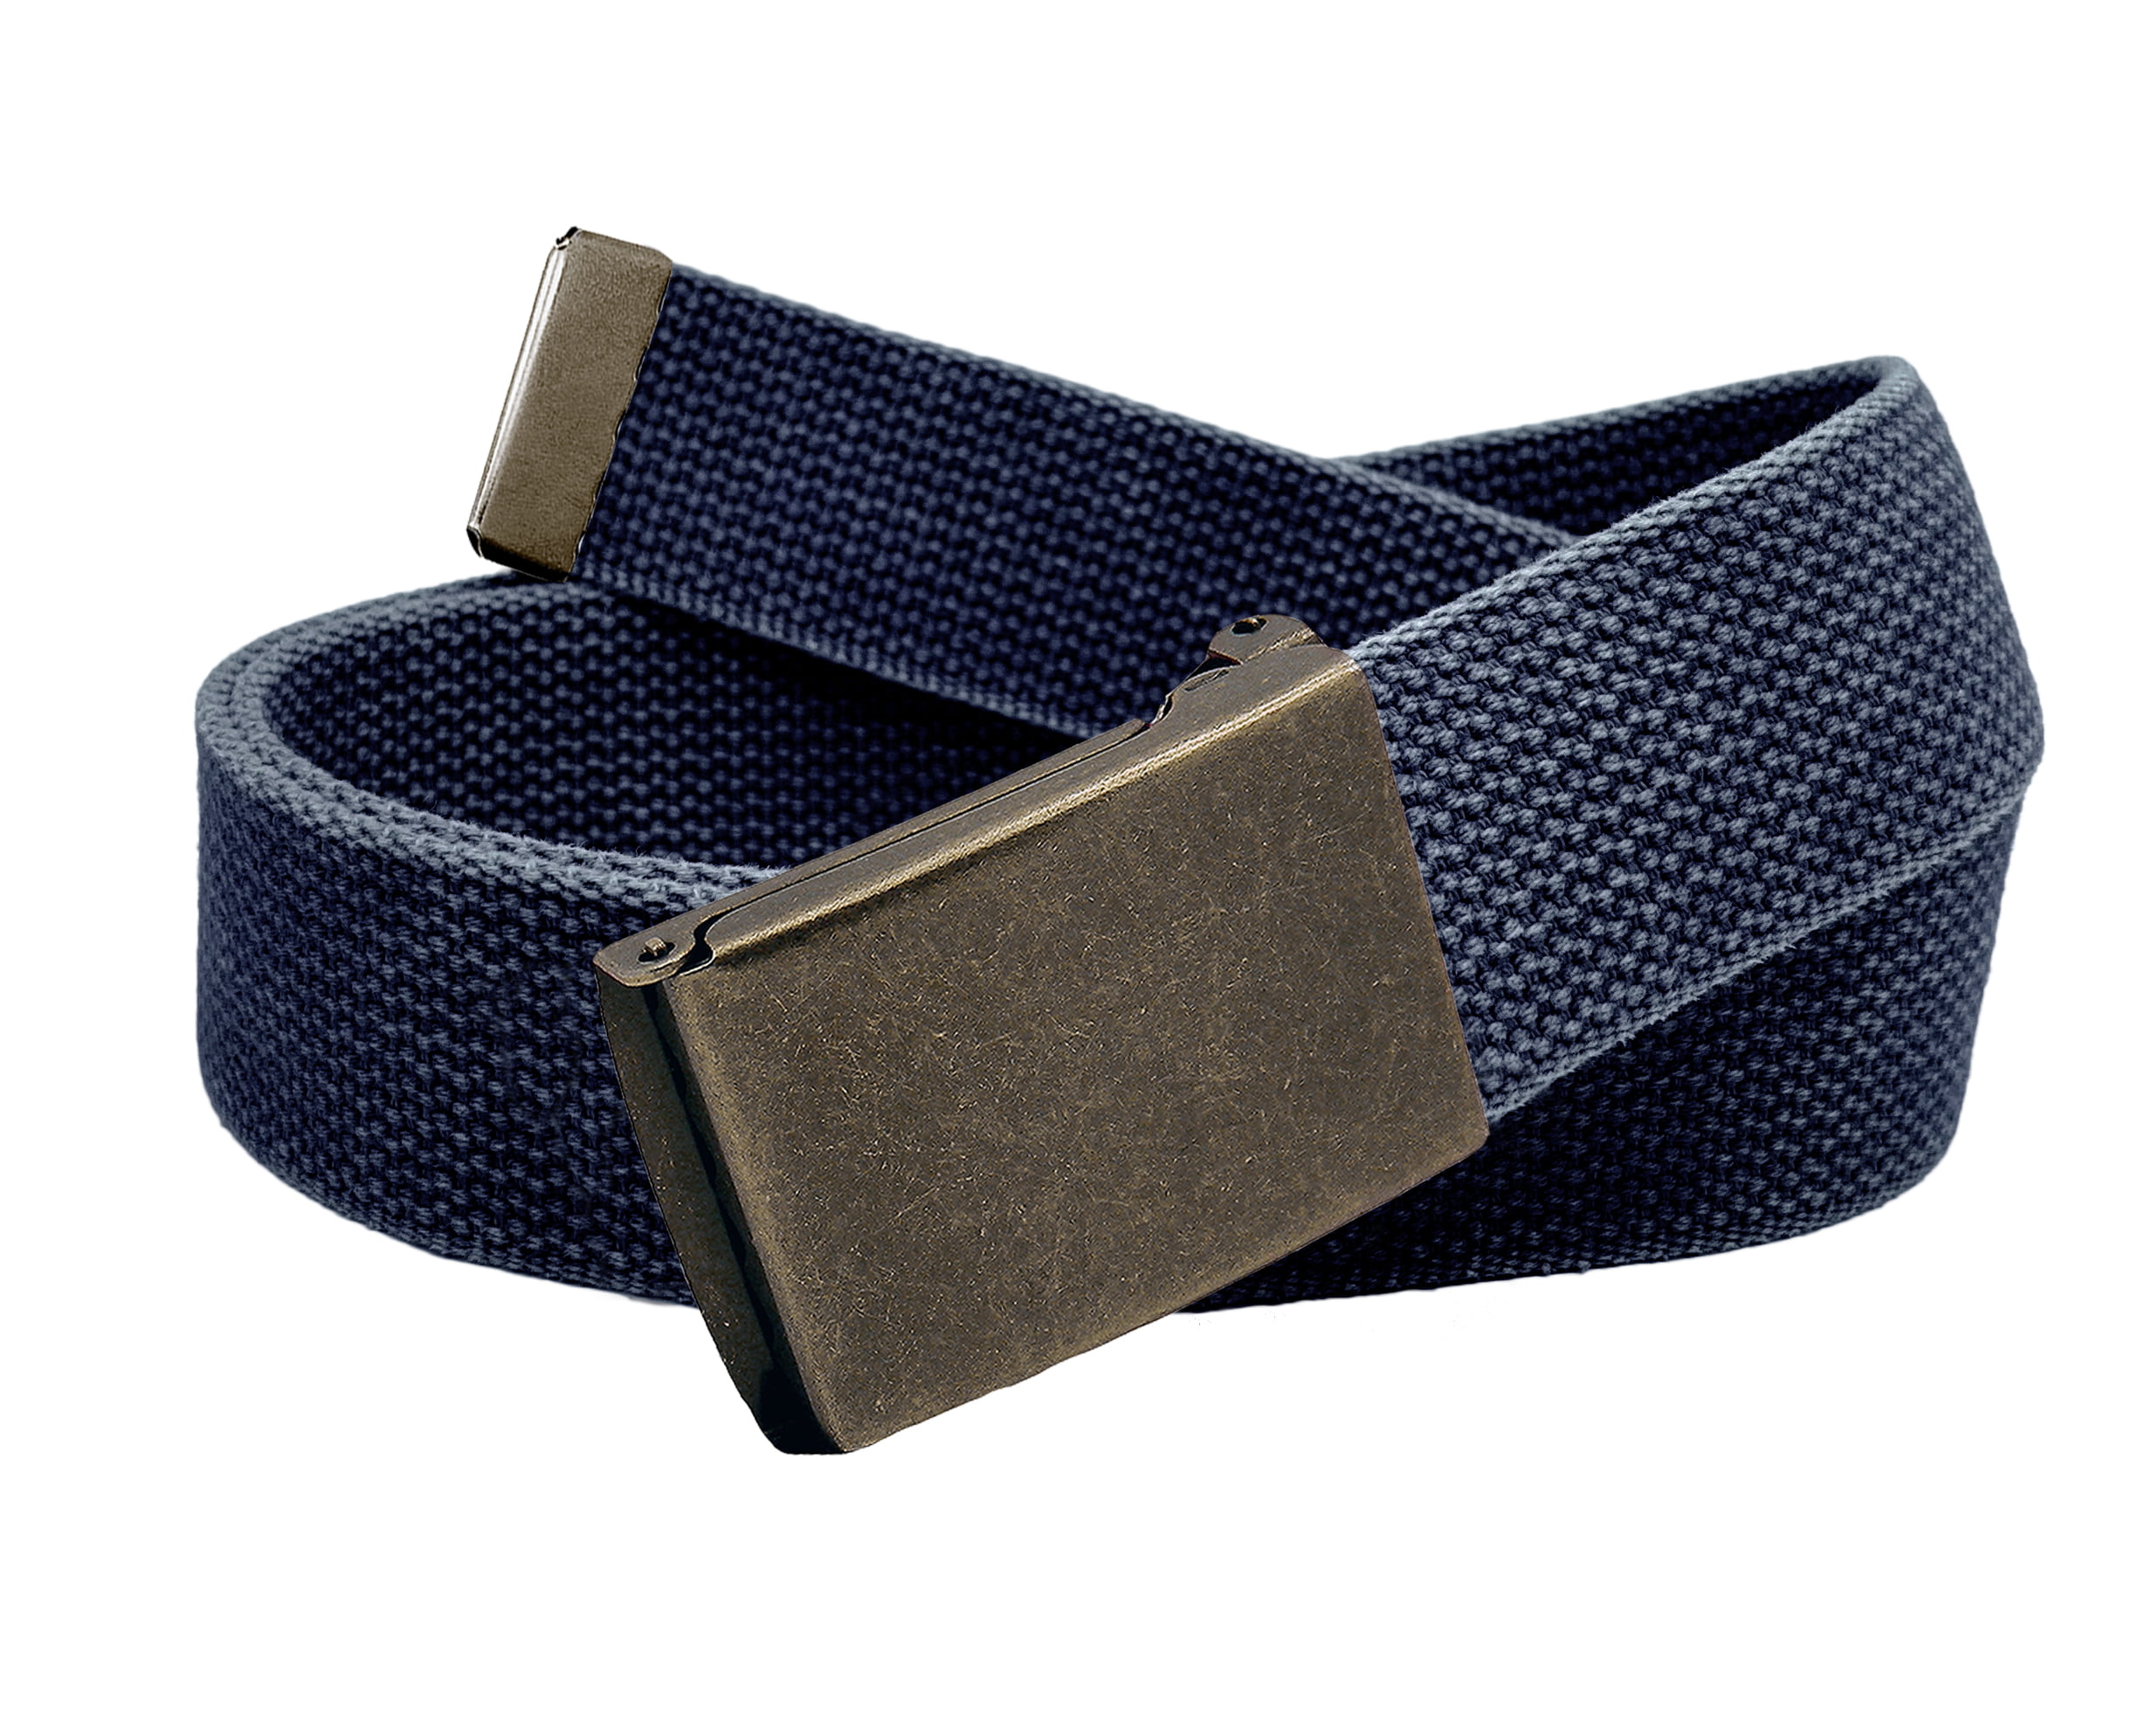 New 1.5" X 42" Made in the USA Men's Black Cotton Stonewashed Web Belt 